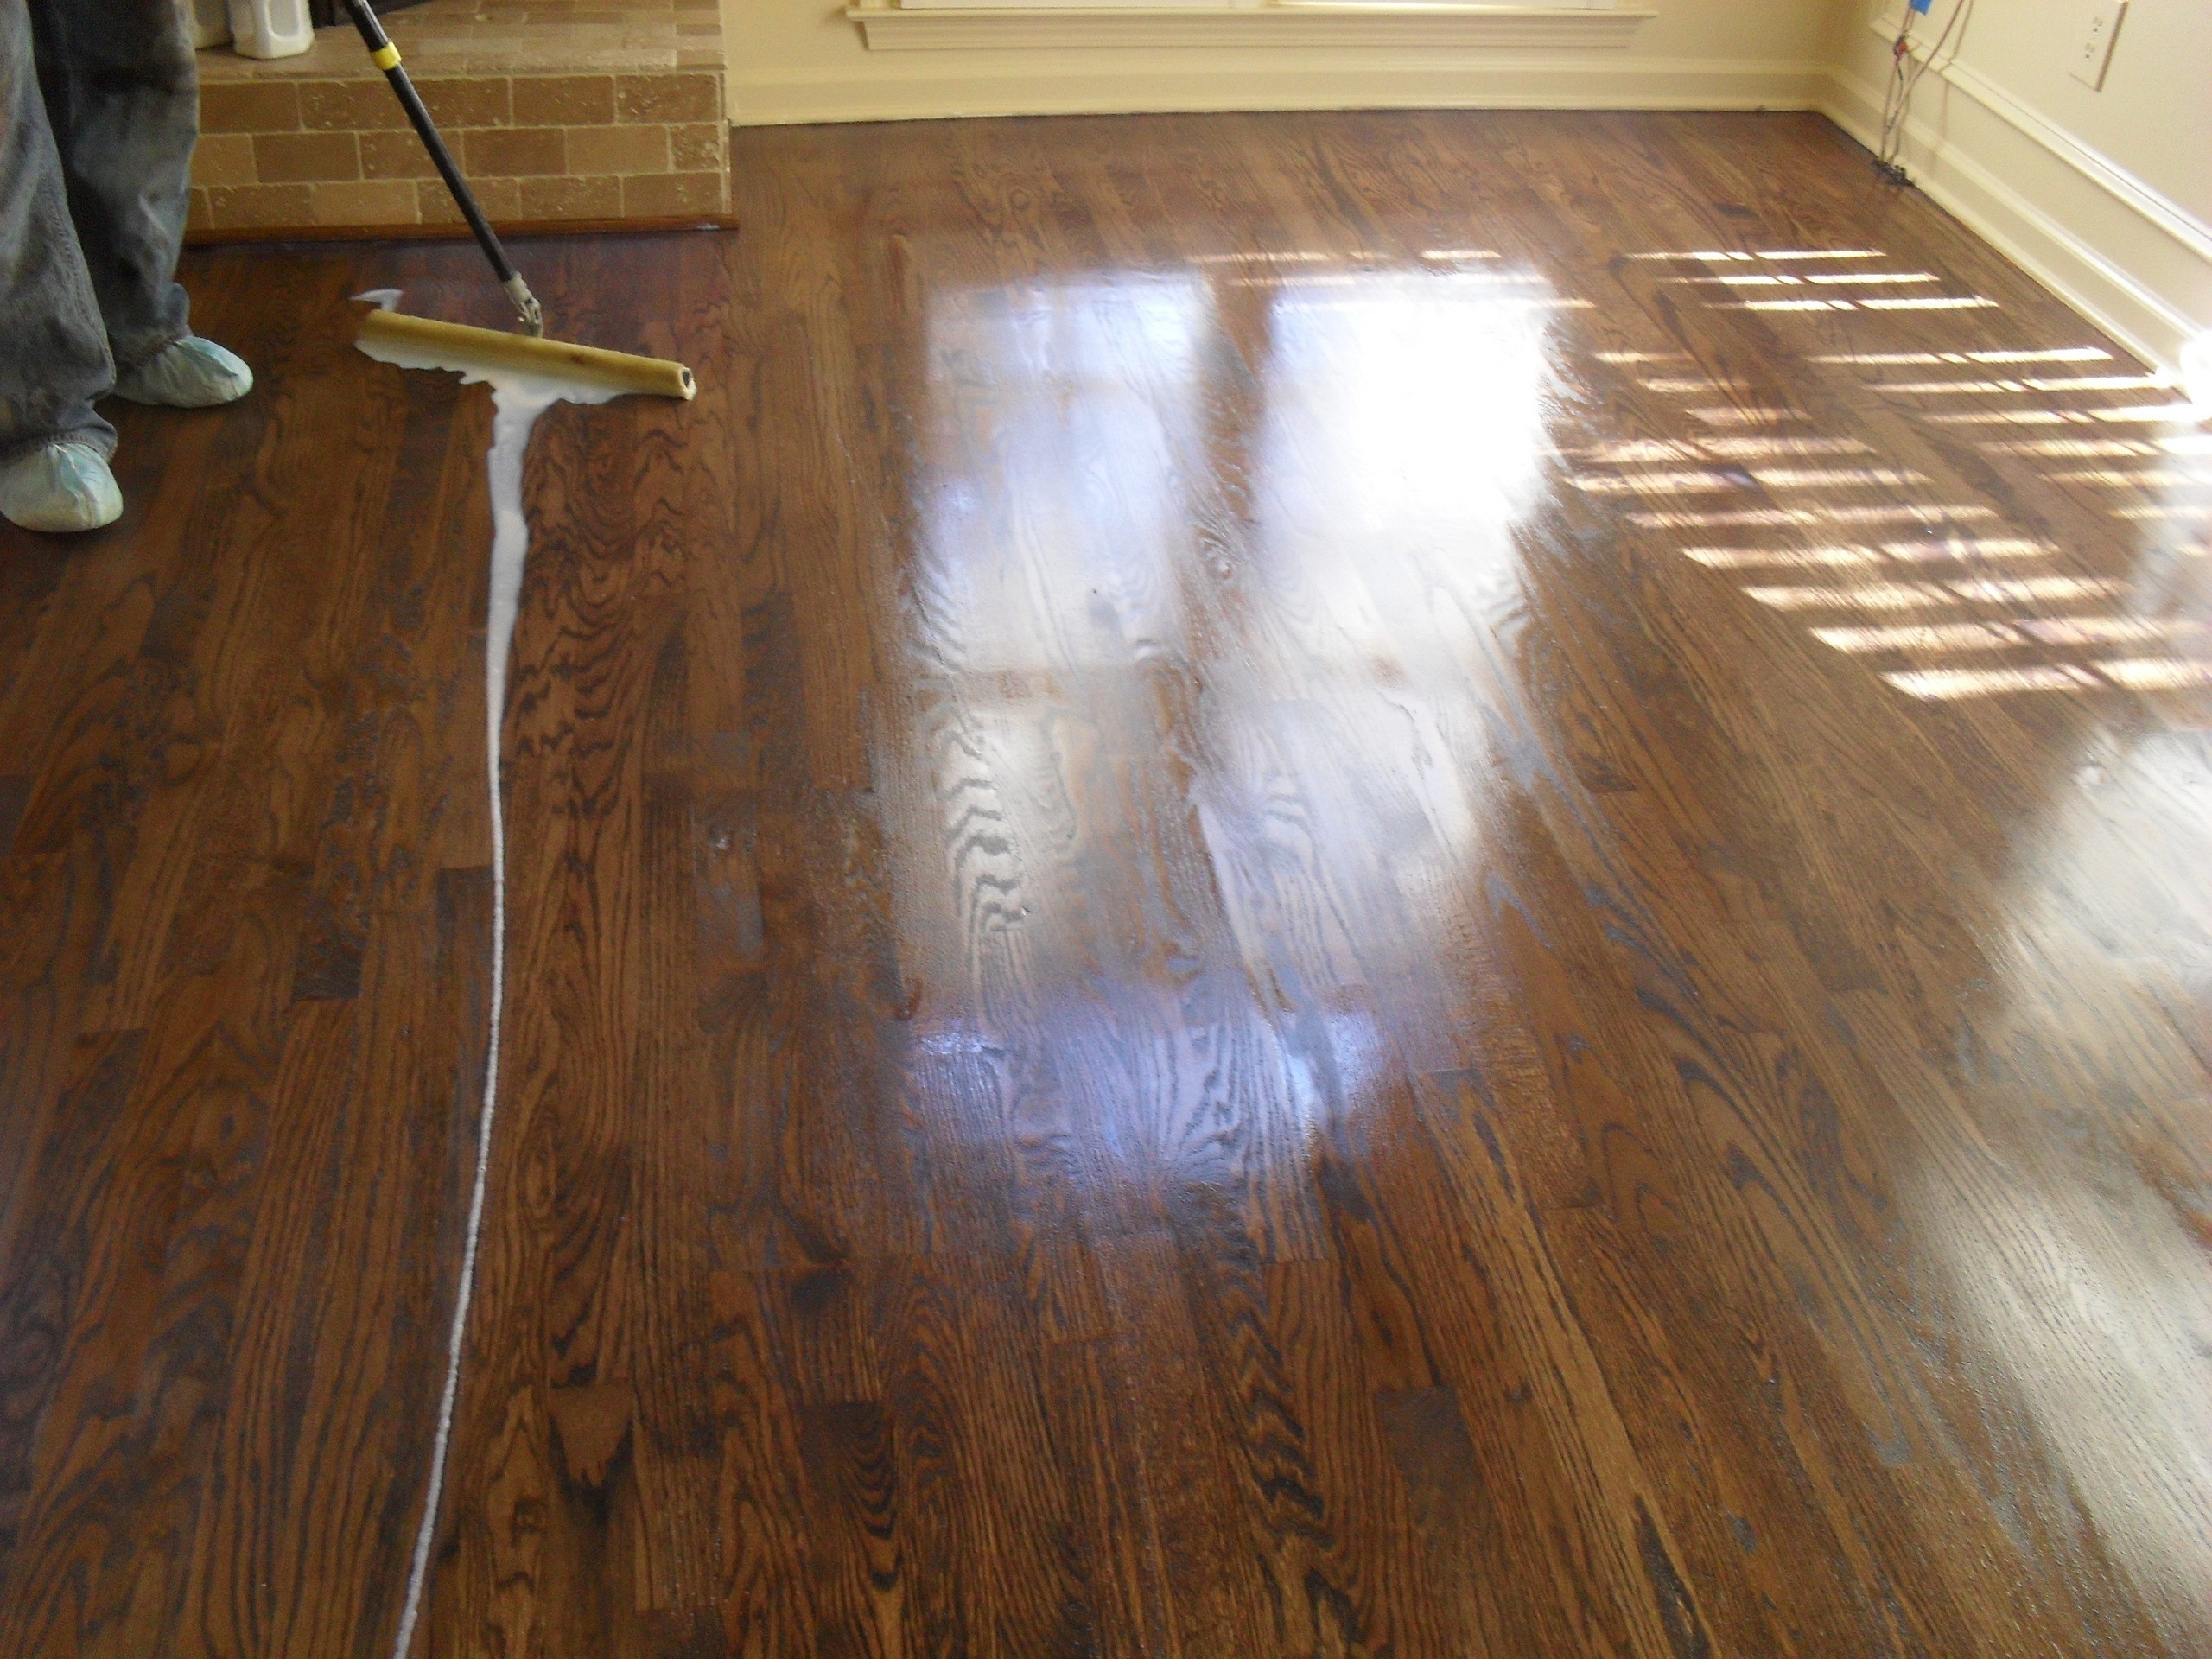 hardwood floor cleaner for pet stains of hardwood floor refinishing chicago jacobean stained fir wood floors pertaining to hardwood floor refinishing chicago will refinishingod floors pet stains old without sanding wood with